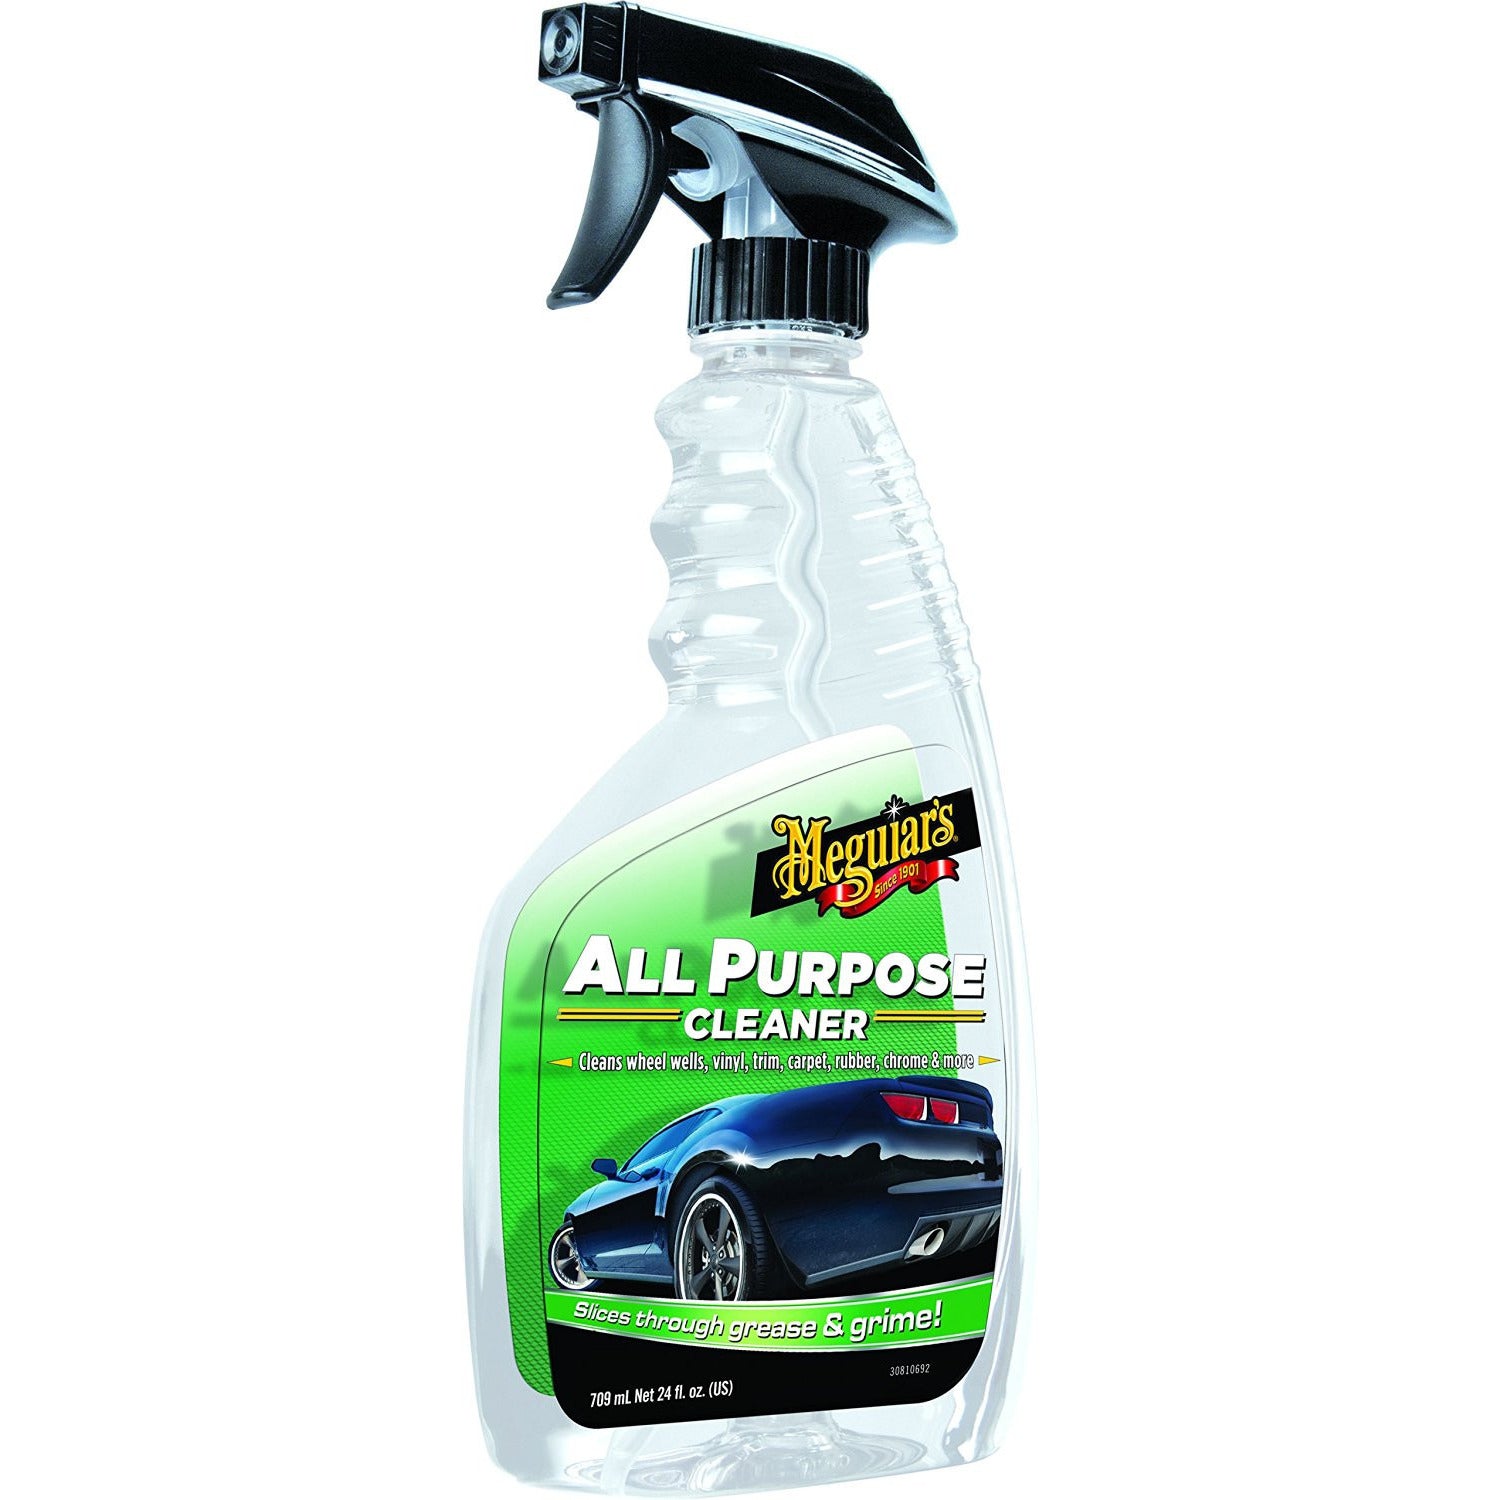 Meguiars Engine Dressing Restores &Protects Your Engine Bay 450ml Trigger  Spray